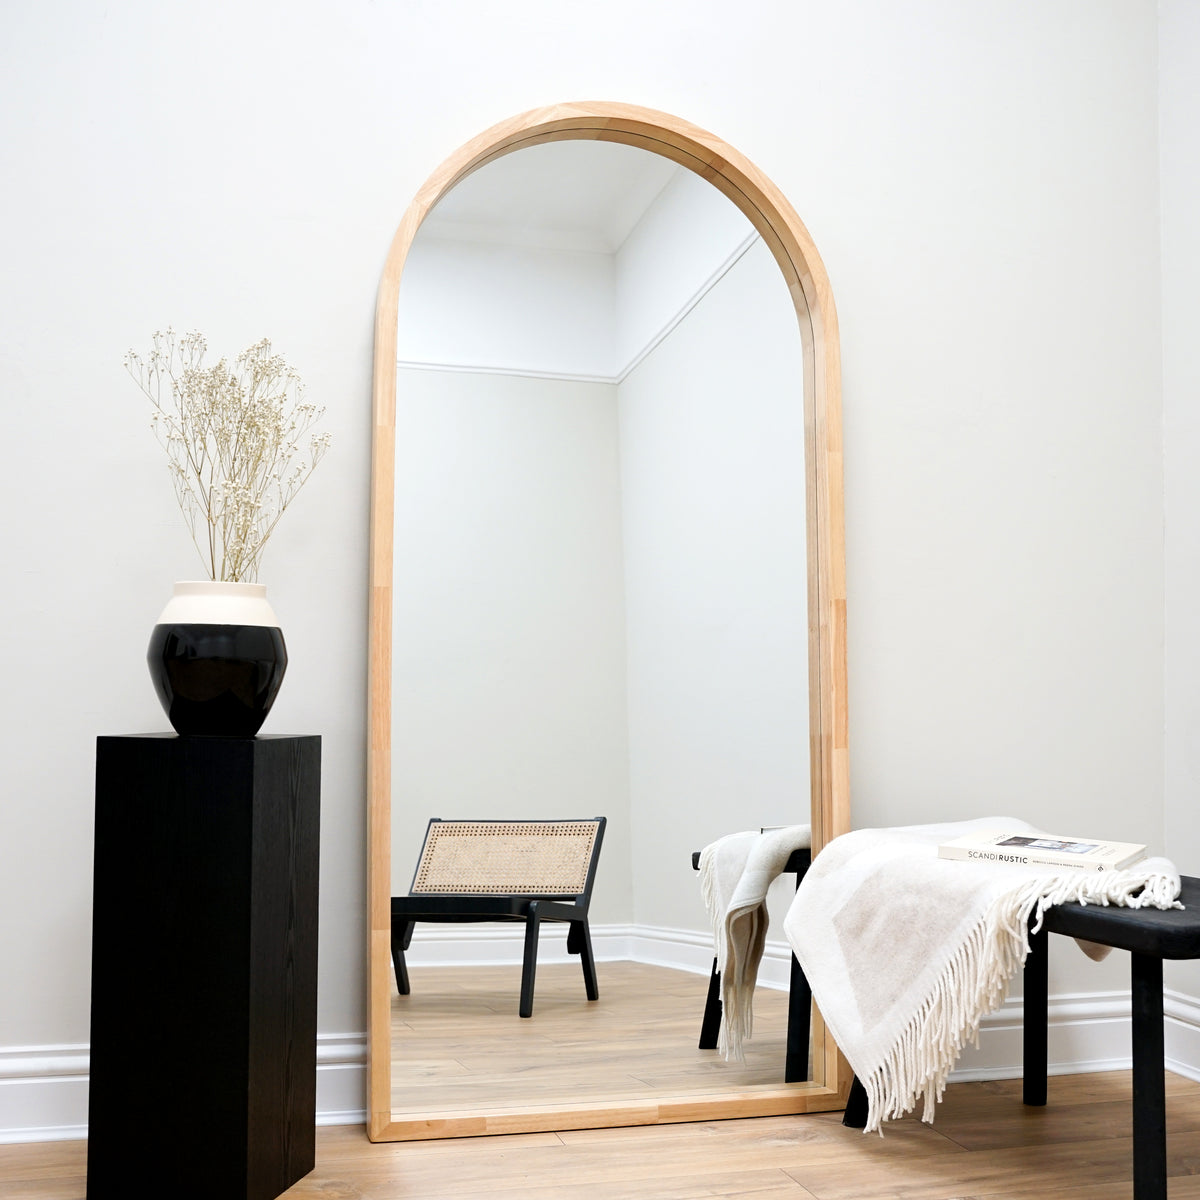 Natural Organic Full Length Wooden Arched Mirror beside pedestal